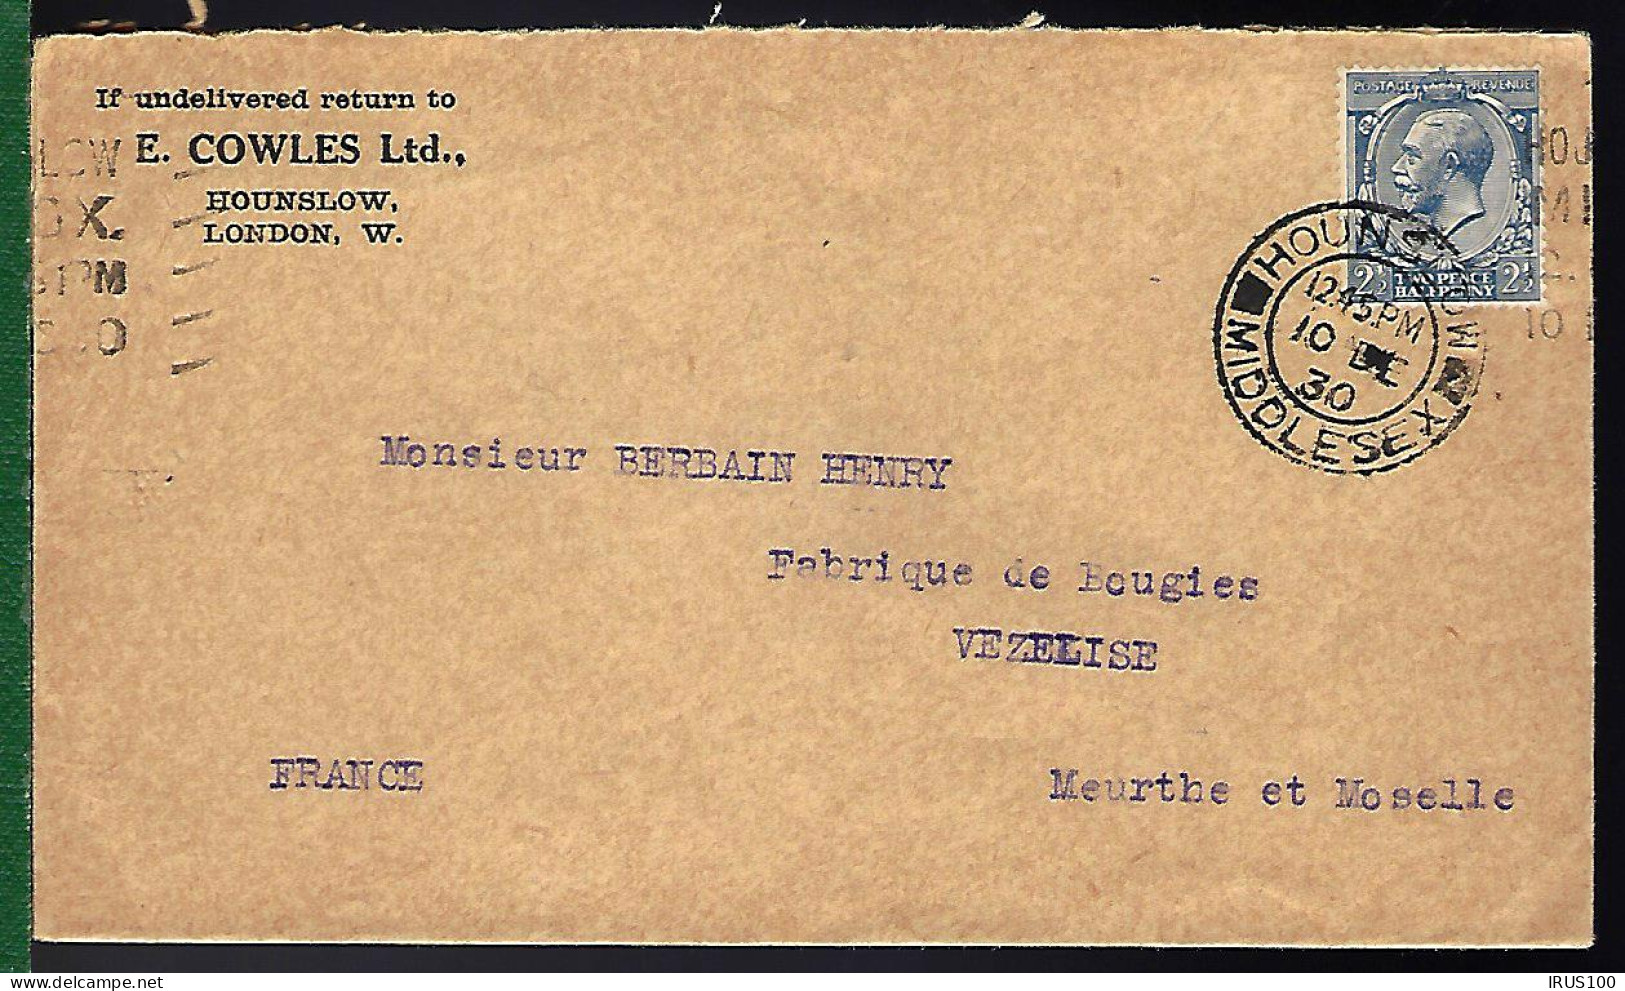 HOUNSLOW MIDDLESEX - 1930 - POUR VEZELISE MEURTHE ET MOSELLE - Covers & Documents